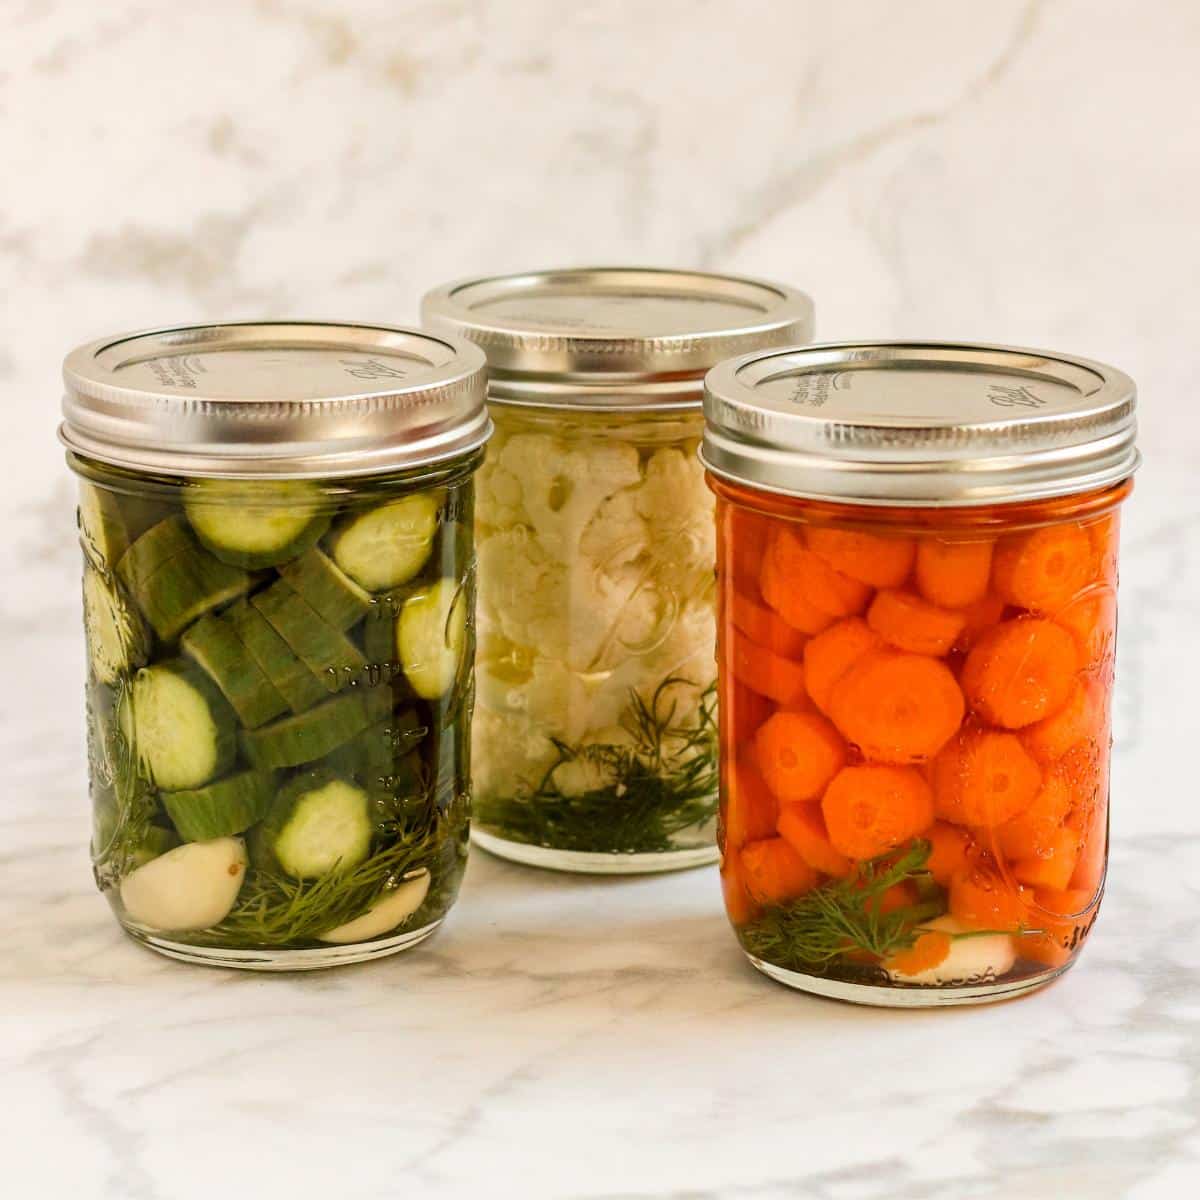 Jars of pickled cucumbers, cauliflower, and carrots.